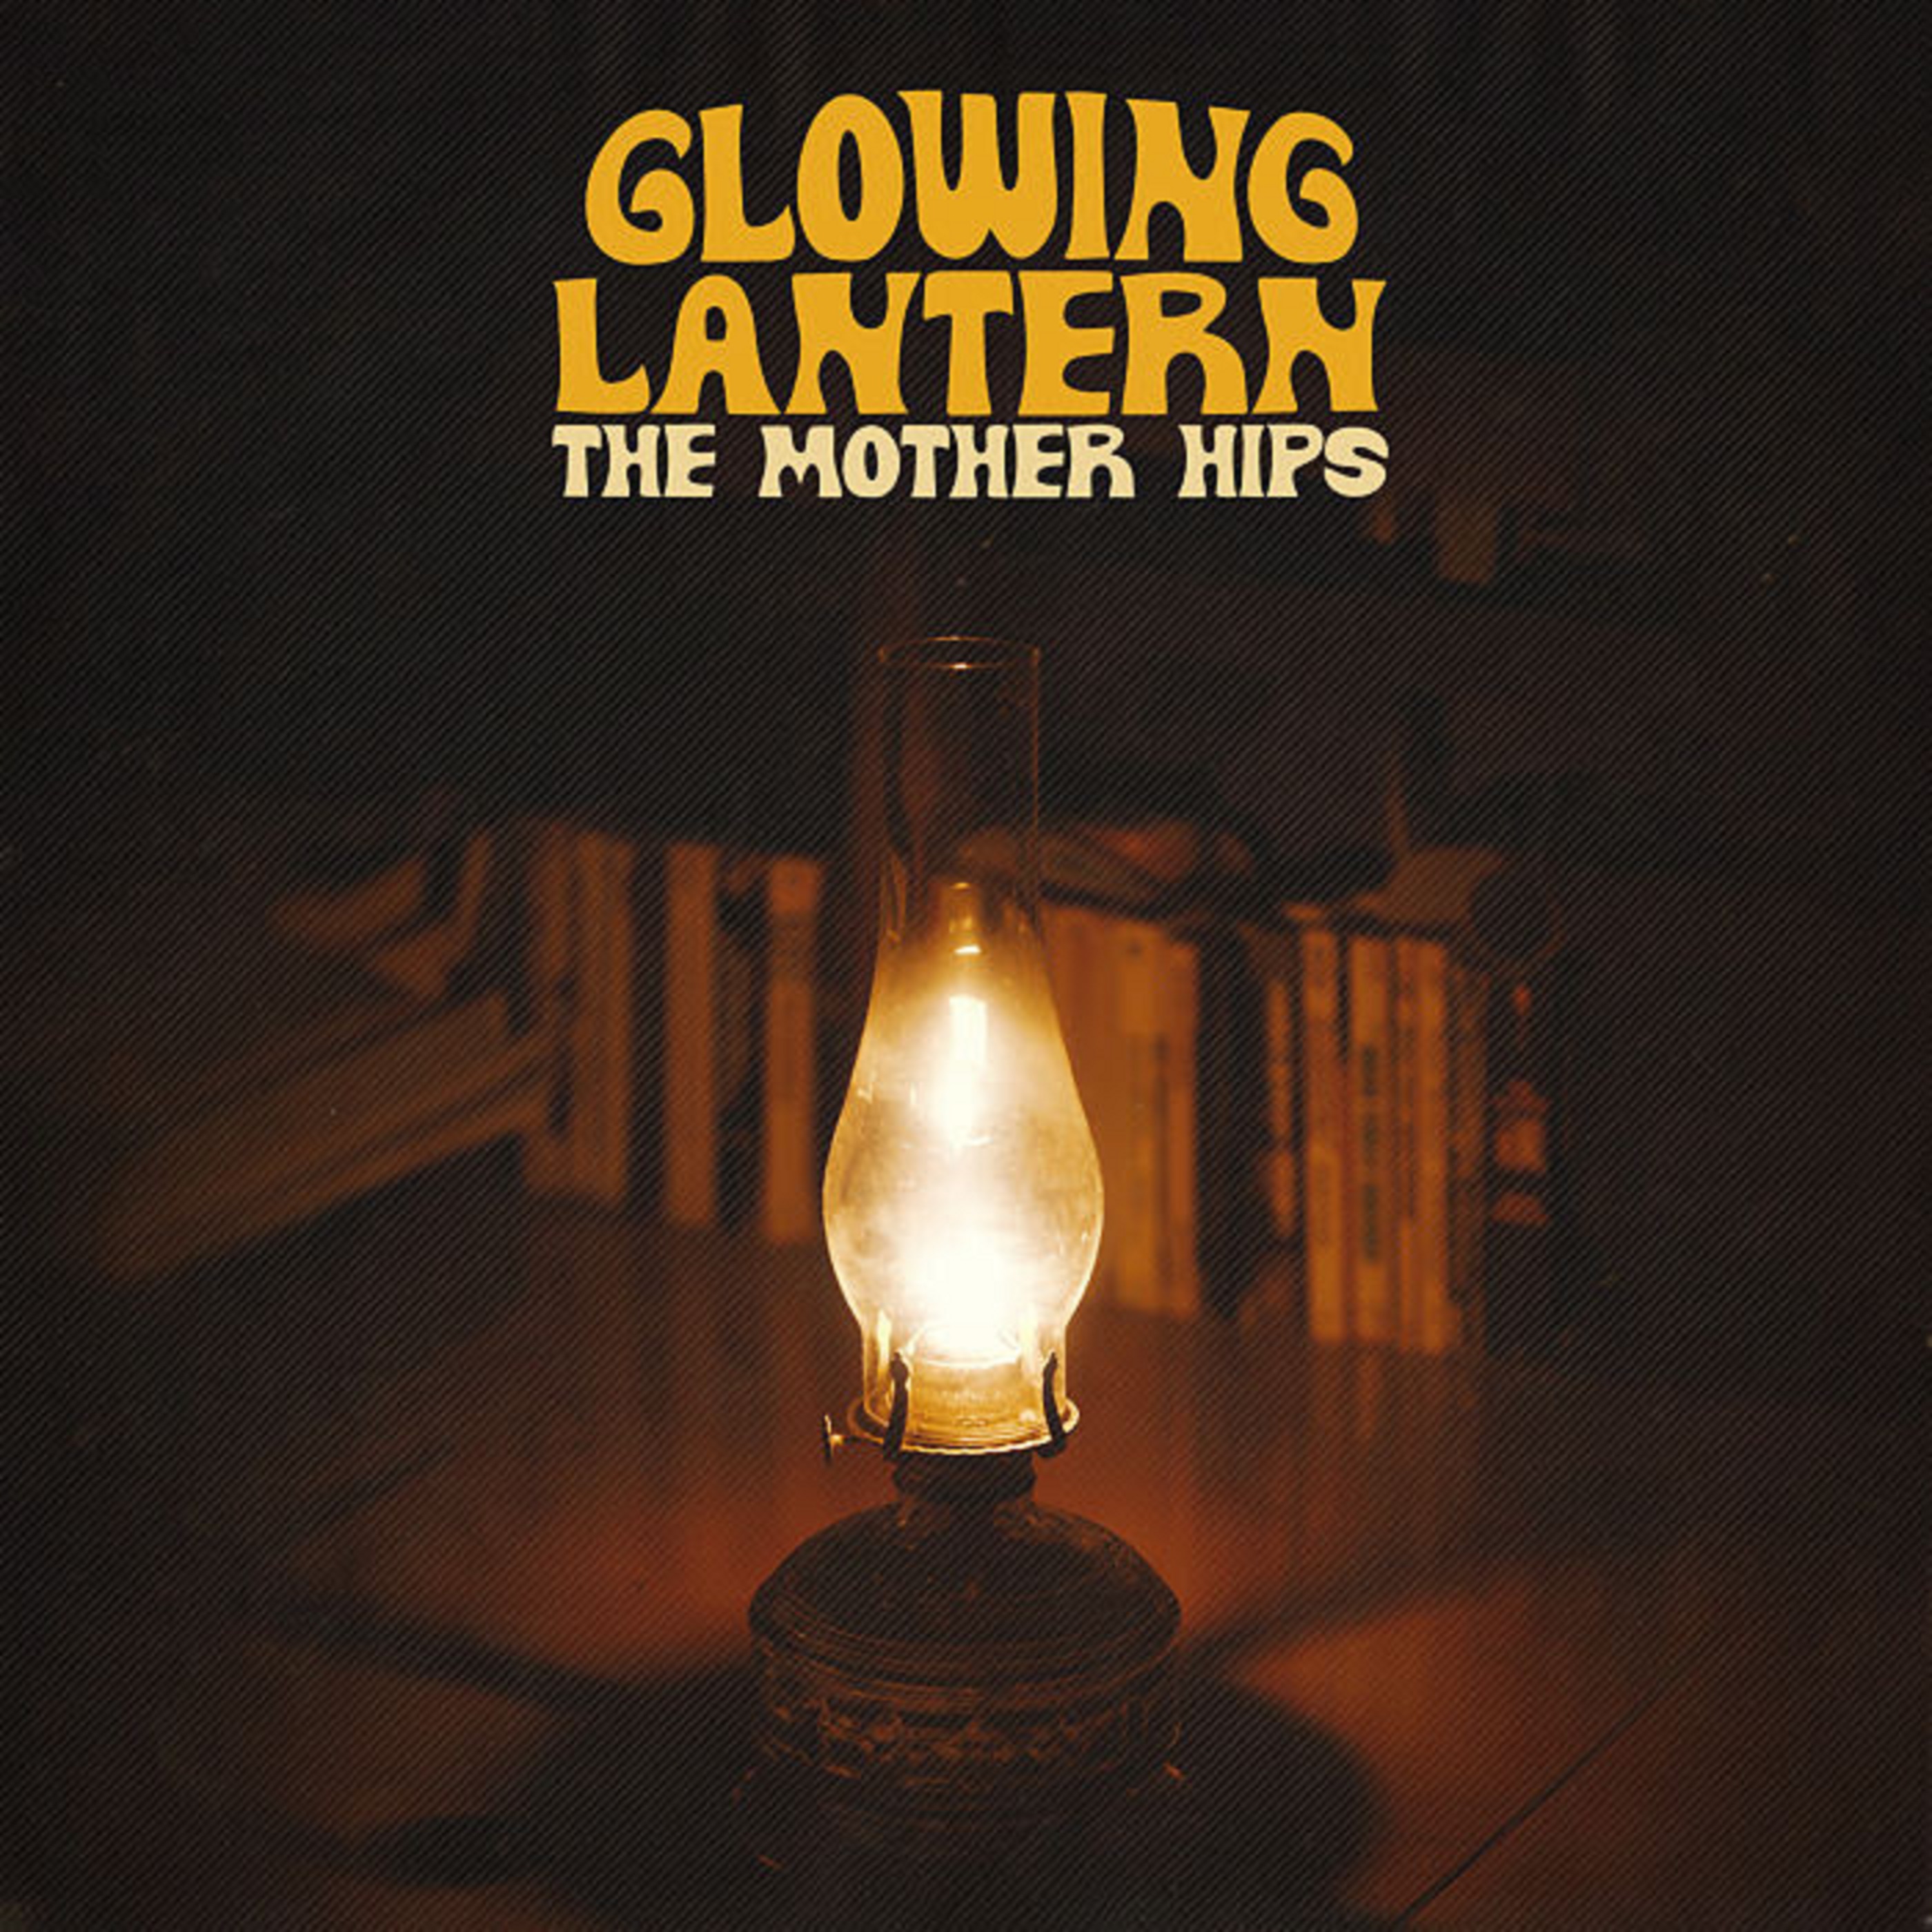 The Mother Hips Announce 'Glowing Lantern' / First Single "Looking At Long Days" Out Today